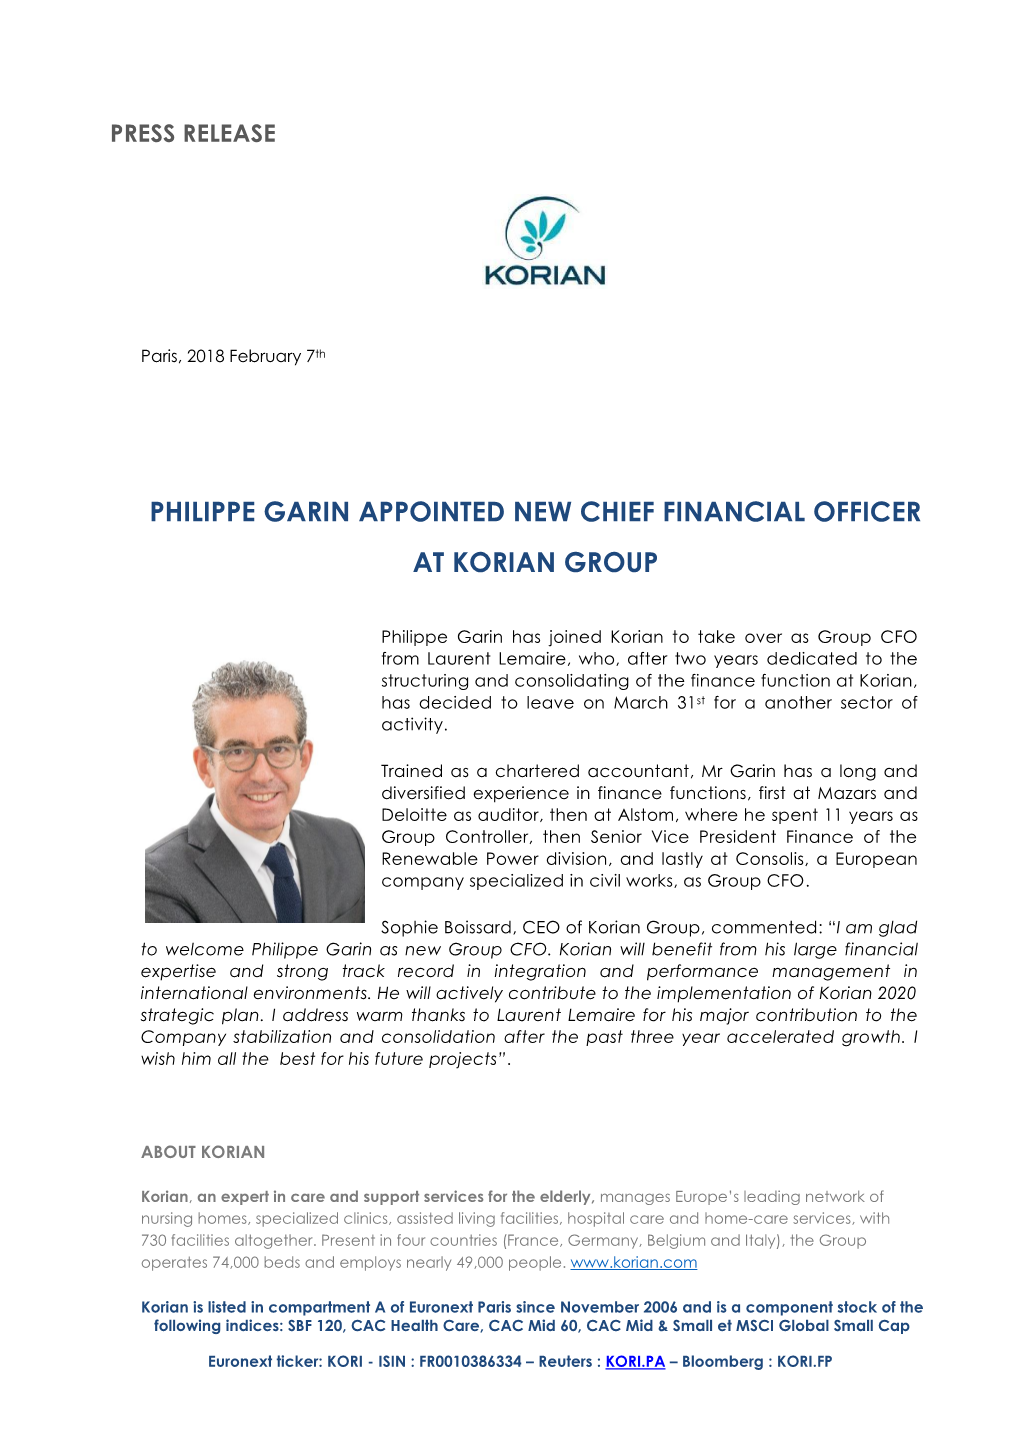 Philippe Garin Appointed New Chief Financial Officer at Korian Group